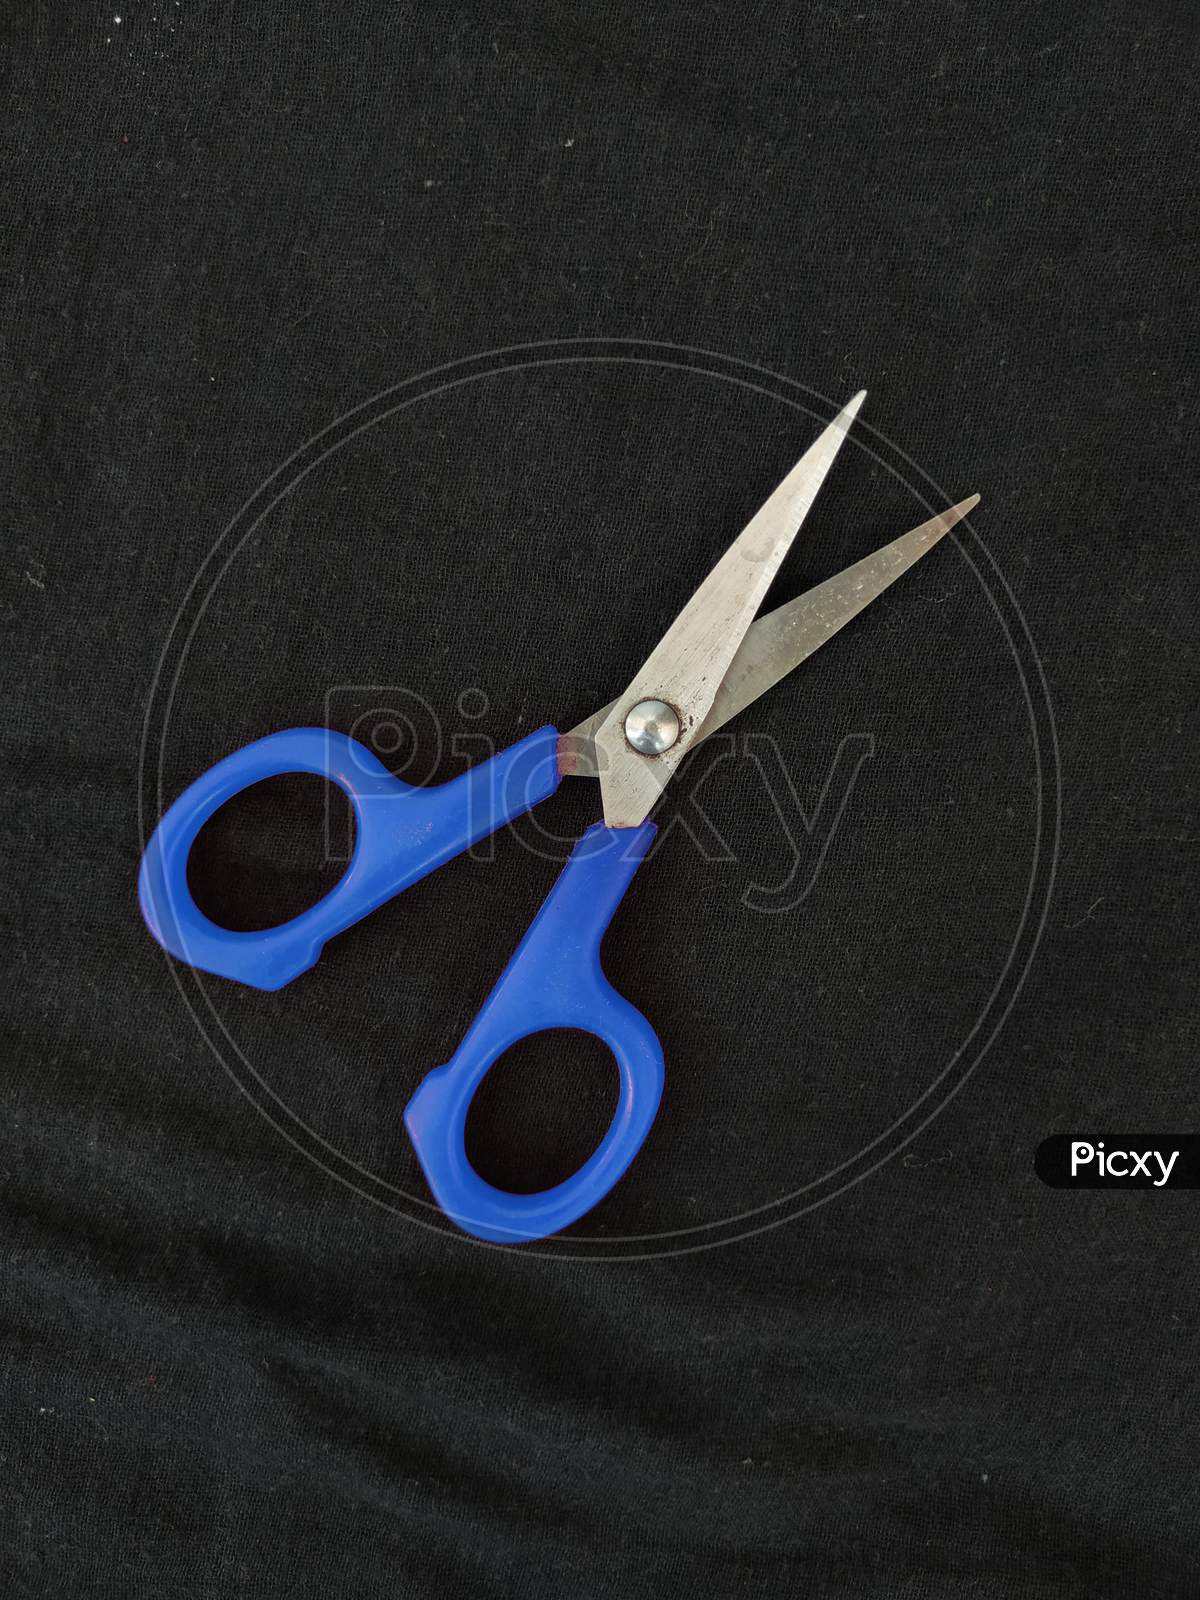 Steel And Blue Color Small Single Scissor Isolated On Black Background